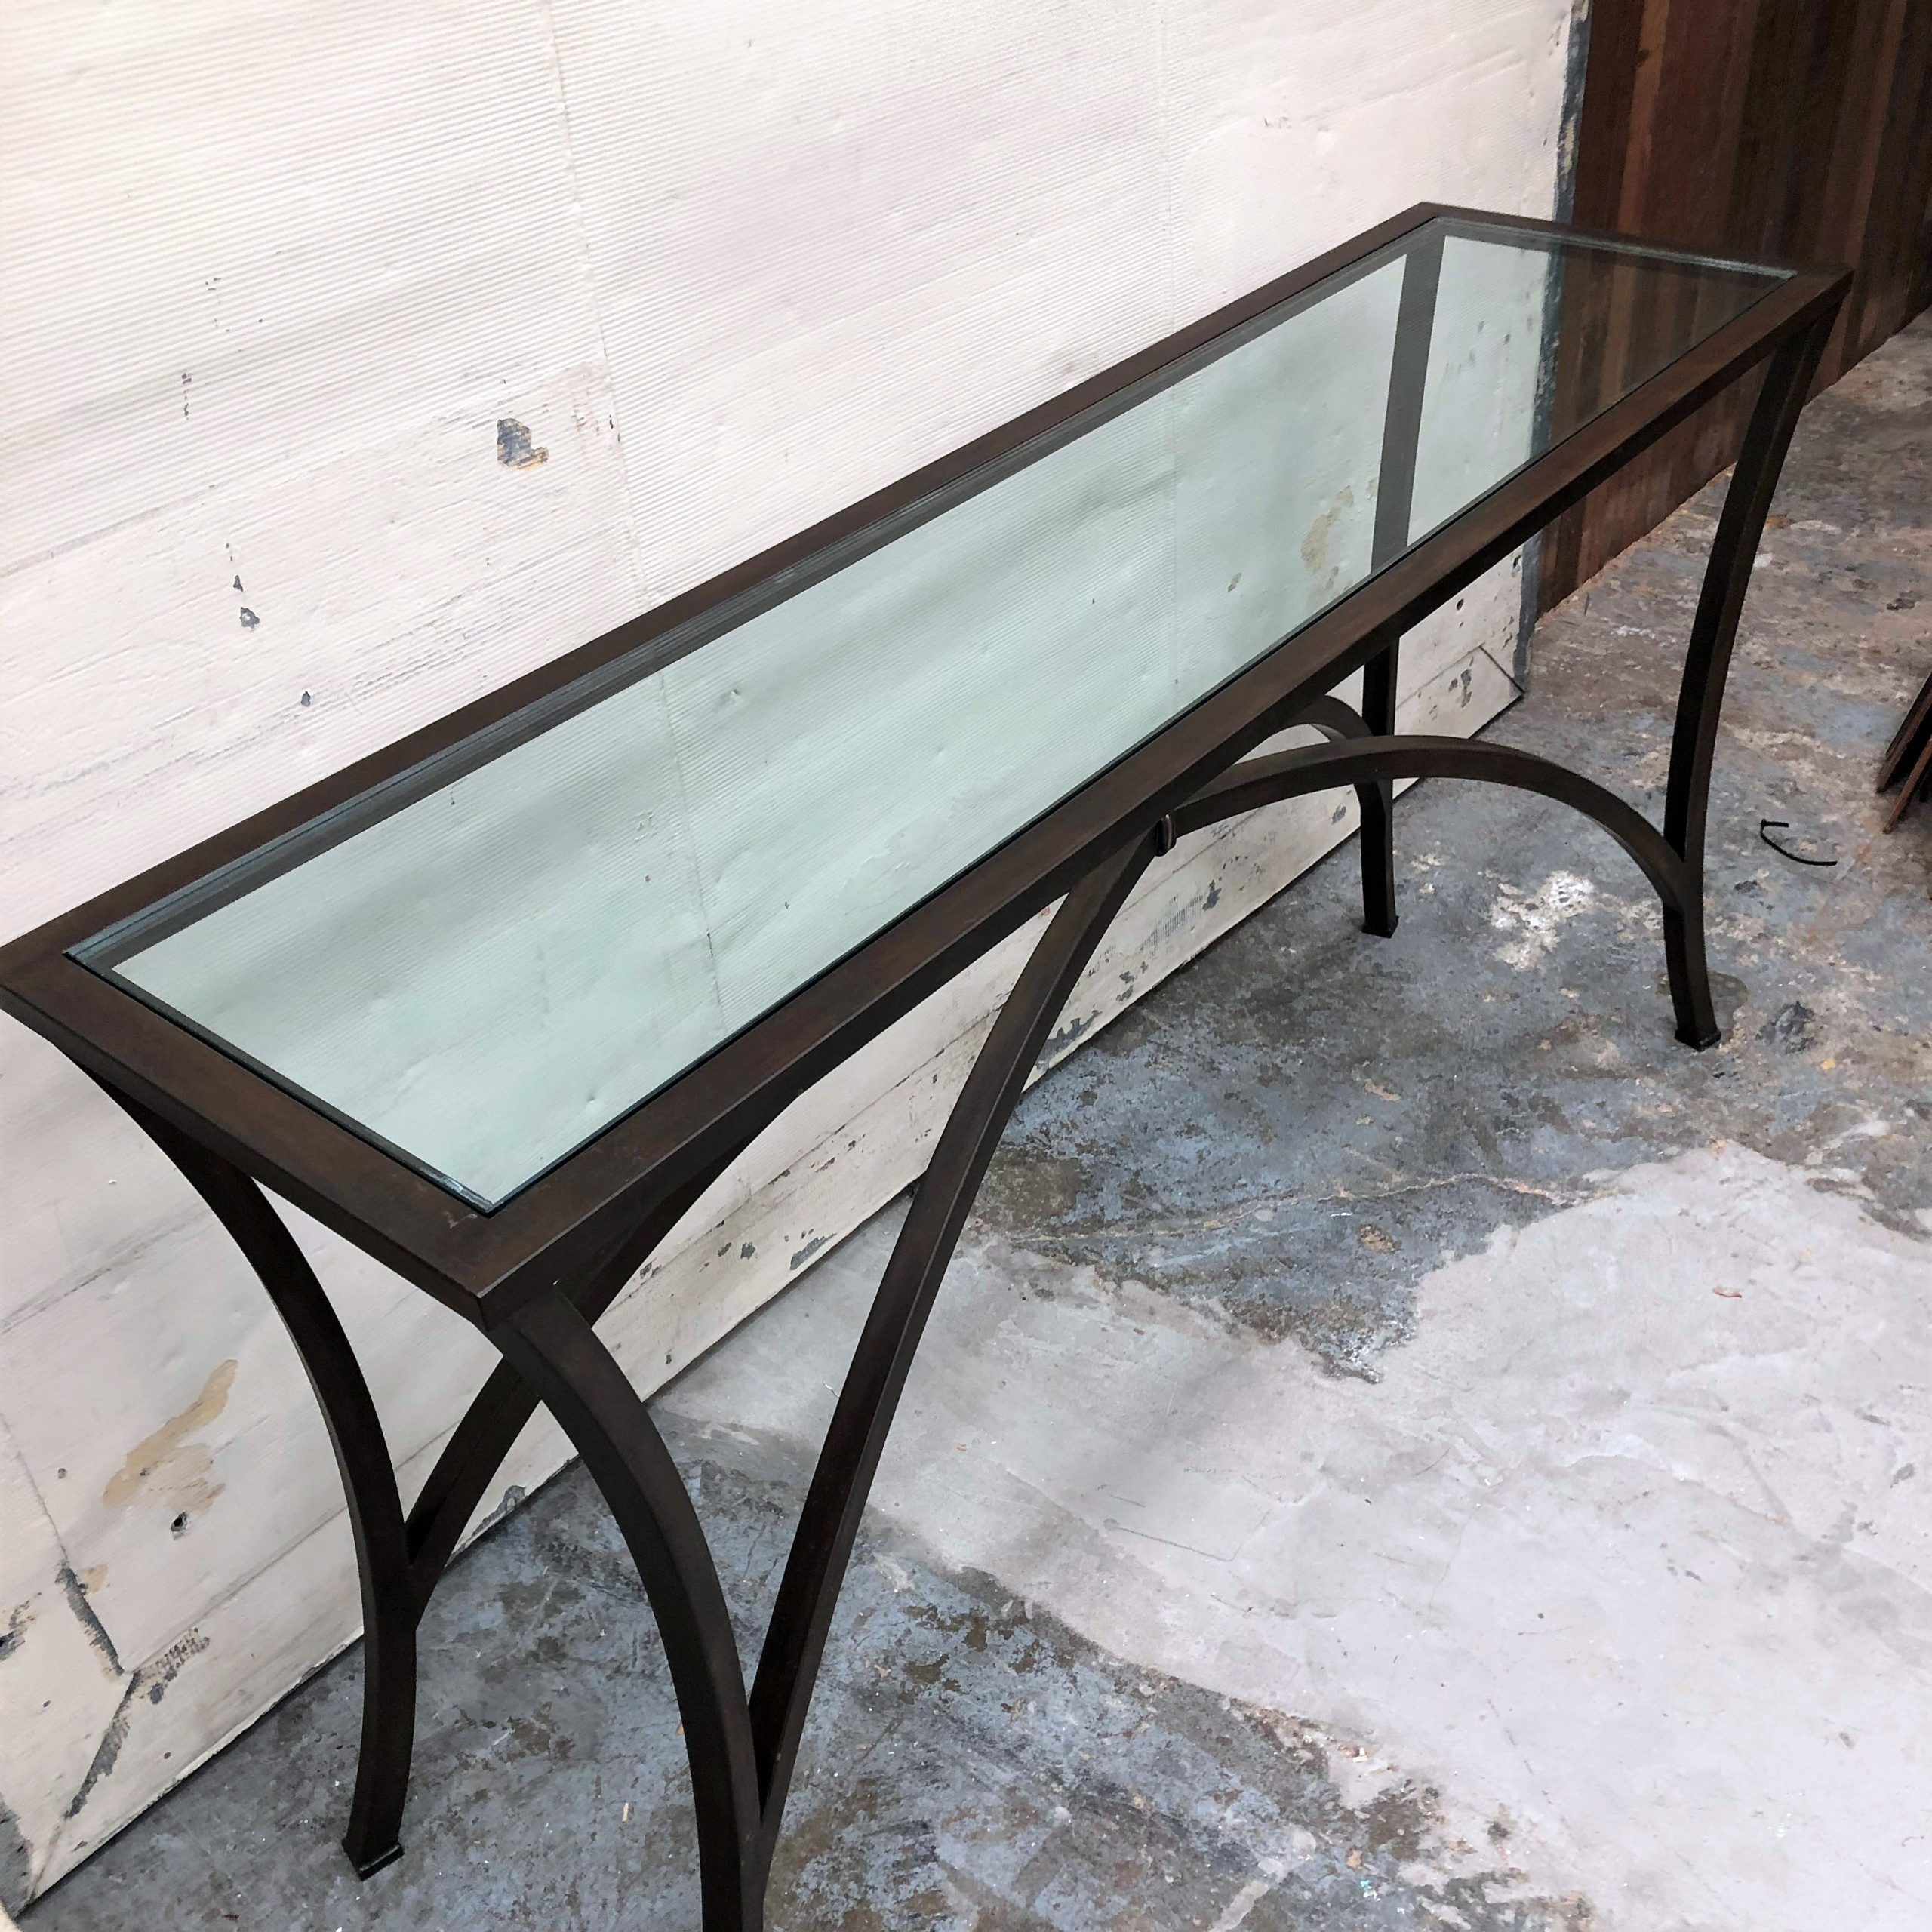 [%oil Rubbed Bronze & Glass Console Table [12 56 51.10 0002 Intended For Current Bronze Metal Rectangular Console Tables|bronze Metal Rectangular Console Tables With Regard To Well Known Oil Rubbed Bronze & Glass Console Table [12 56 51.10 0002|2019 Bronze Metal Rectangular Console Tables With Oil Rubbed Bronze & Glass Console Table [12 56 51.10 0002|recent Oil Rubbed Bronze & Glass Console Table [12 56  (View 9 of 10)